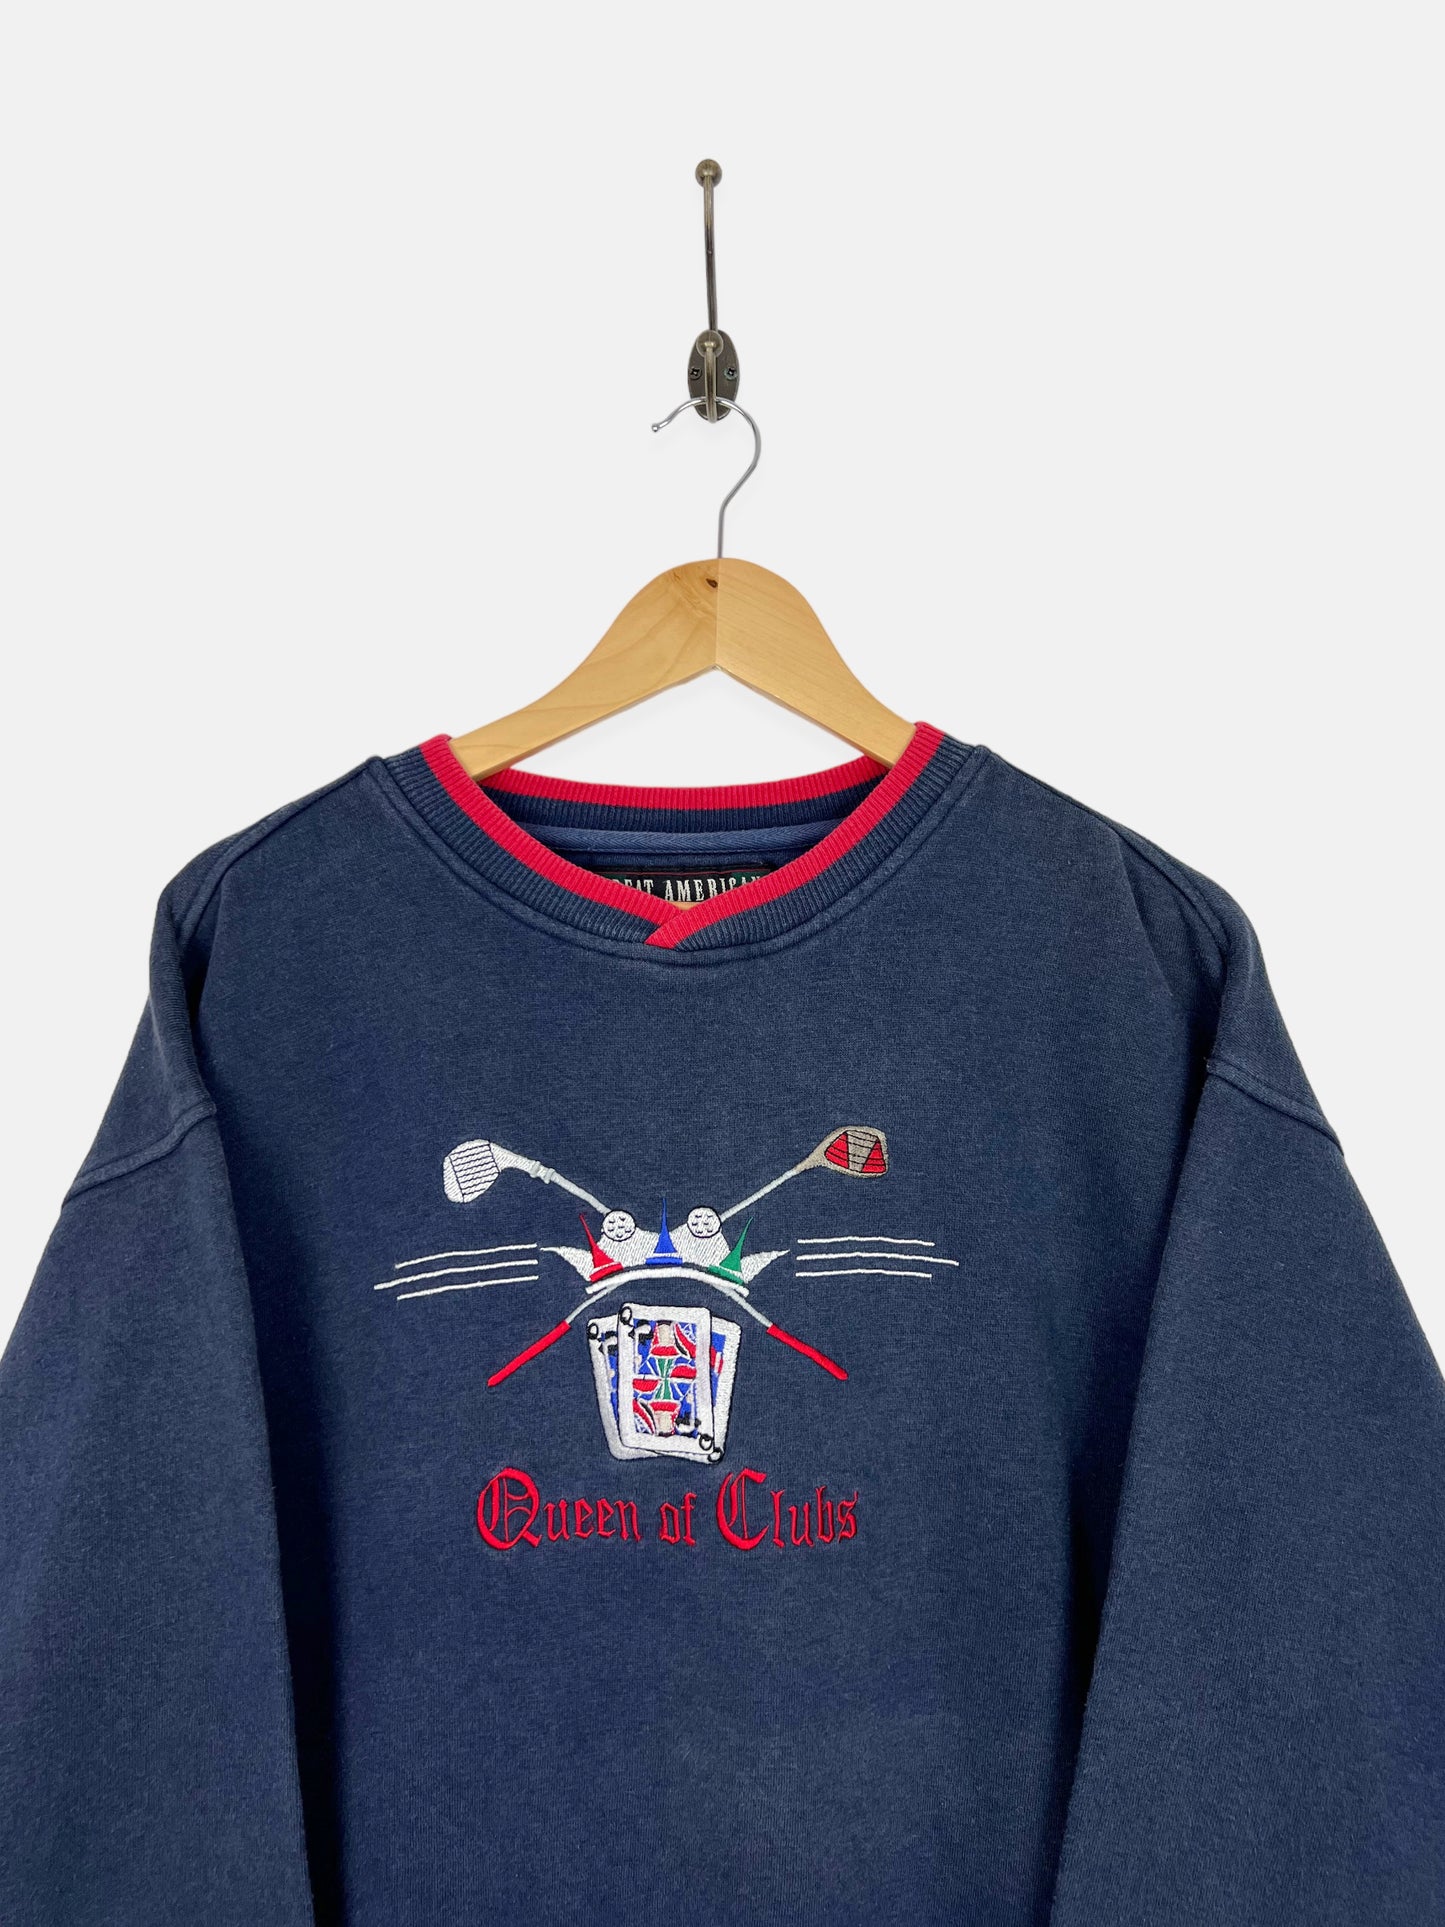 90's Queen Of Clubs Golf Embroidered Vintage Sweatshirt Size M-L